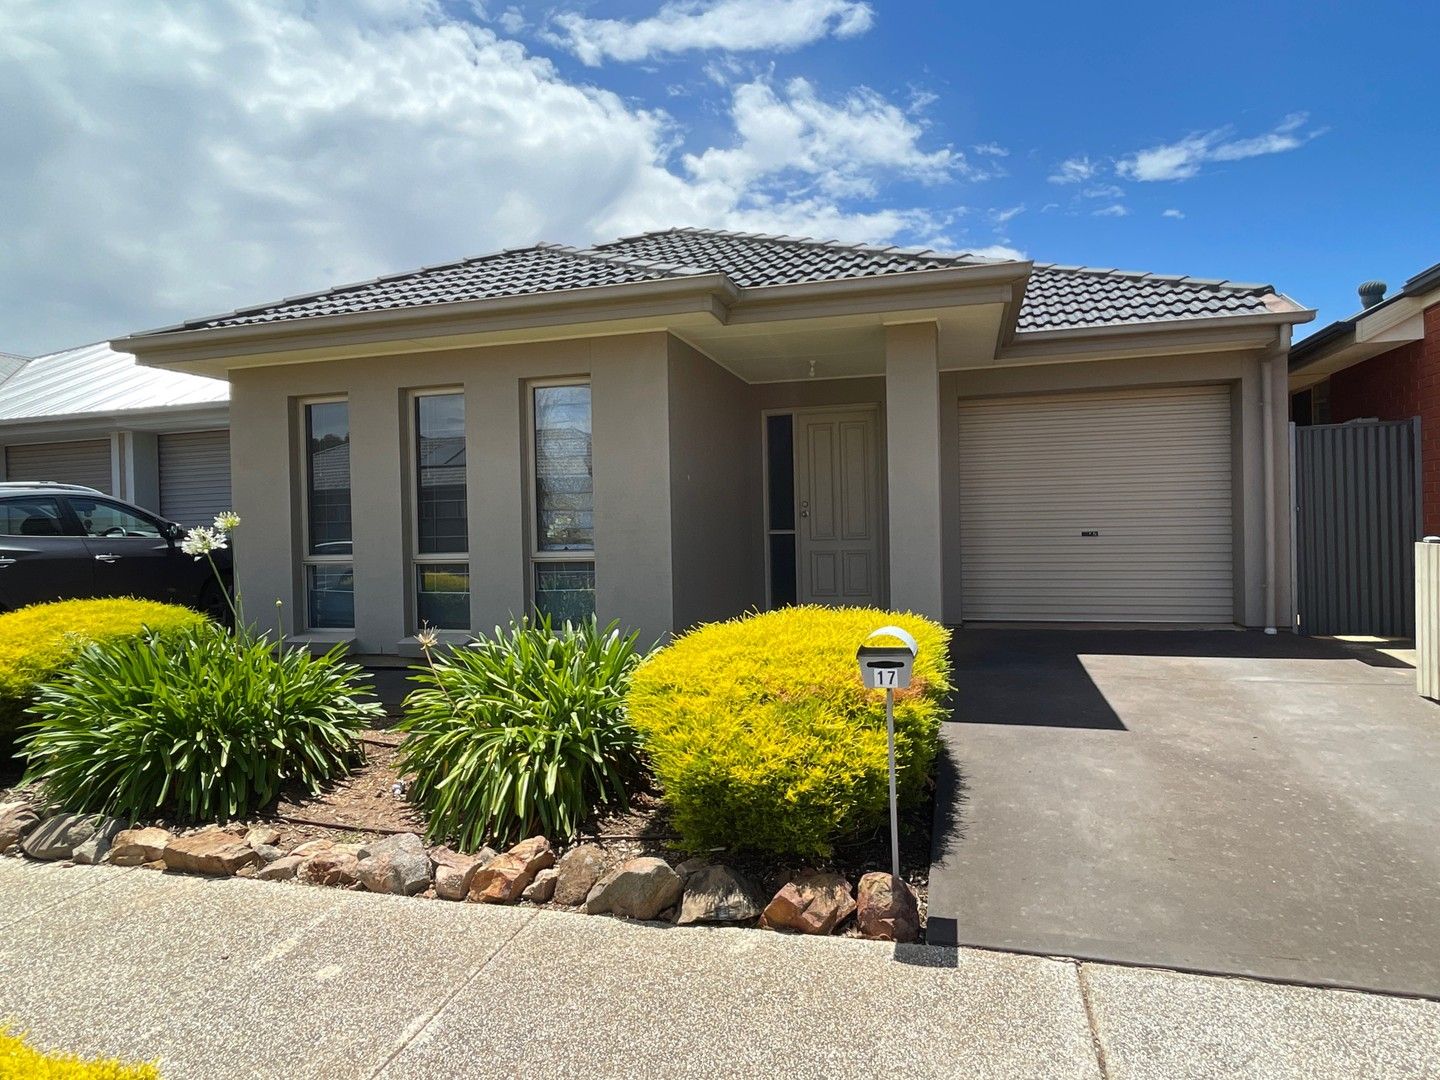 3 bedrooms House in 17 Jabez Way BLAKEVIEW SA, 5114